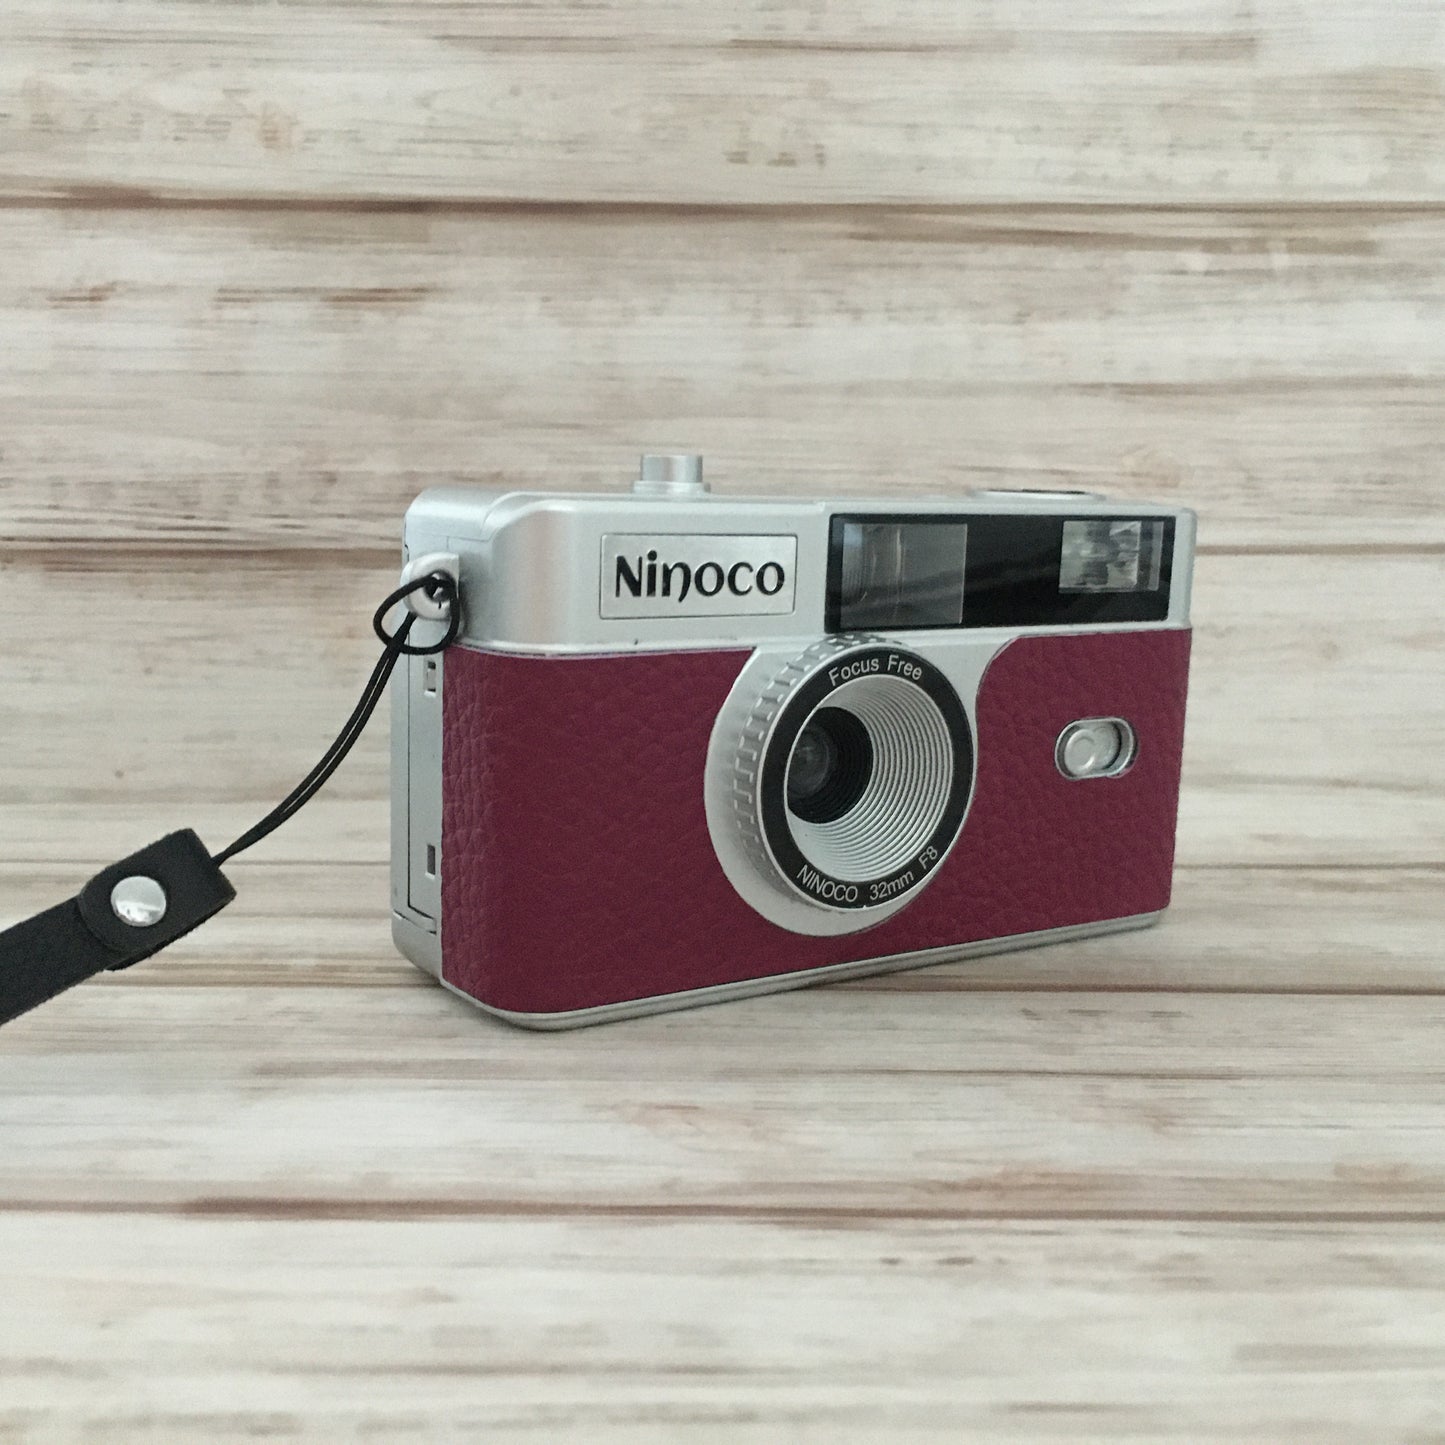 Point & shoot ! Brand new 35mm film camera with raspberry leather